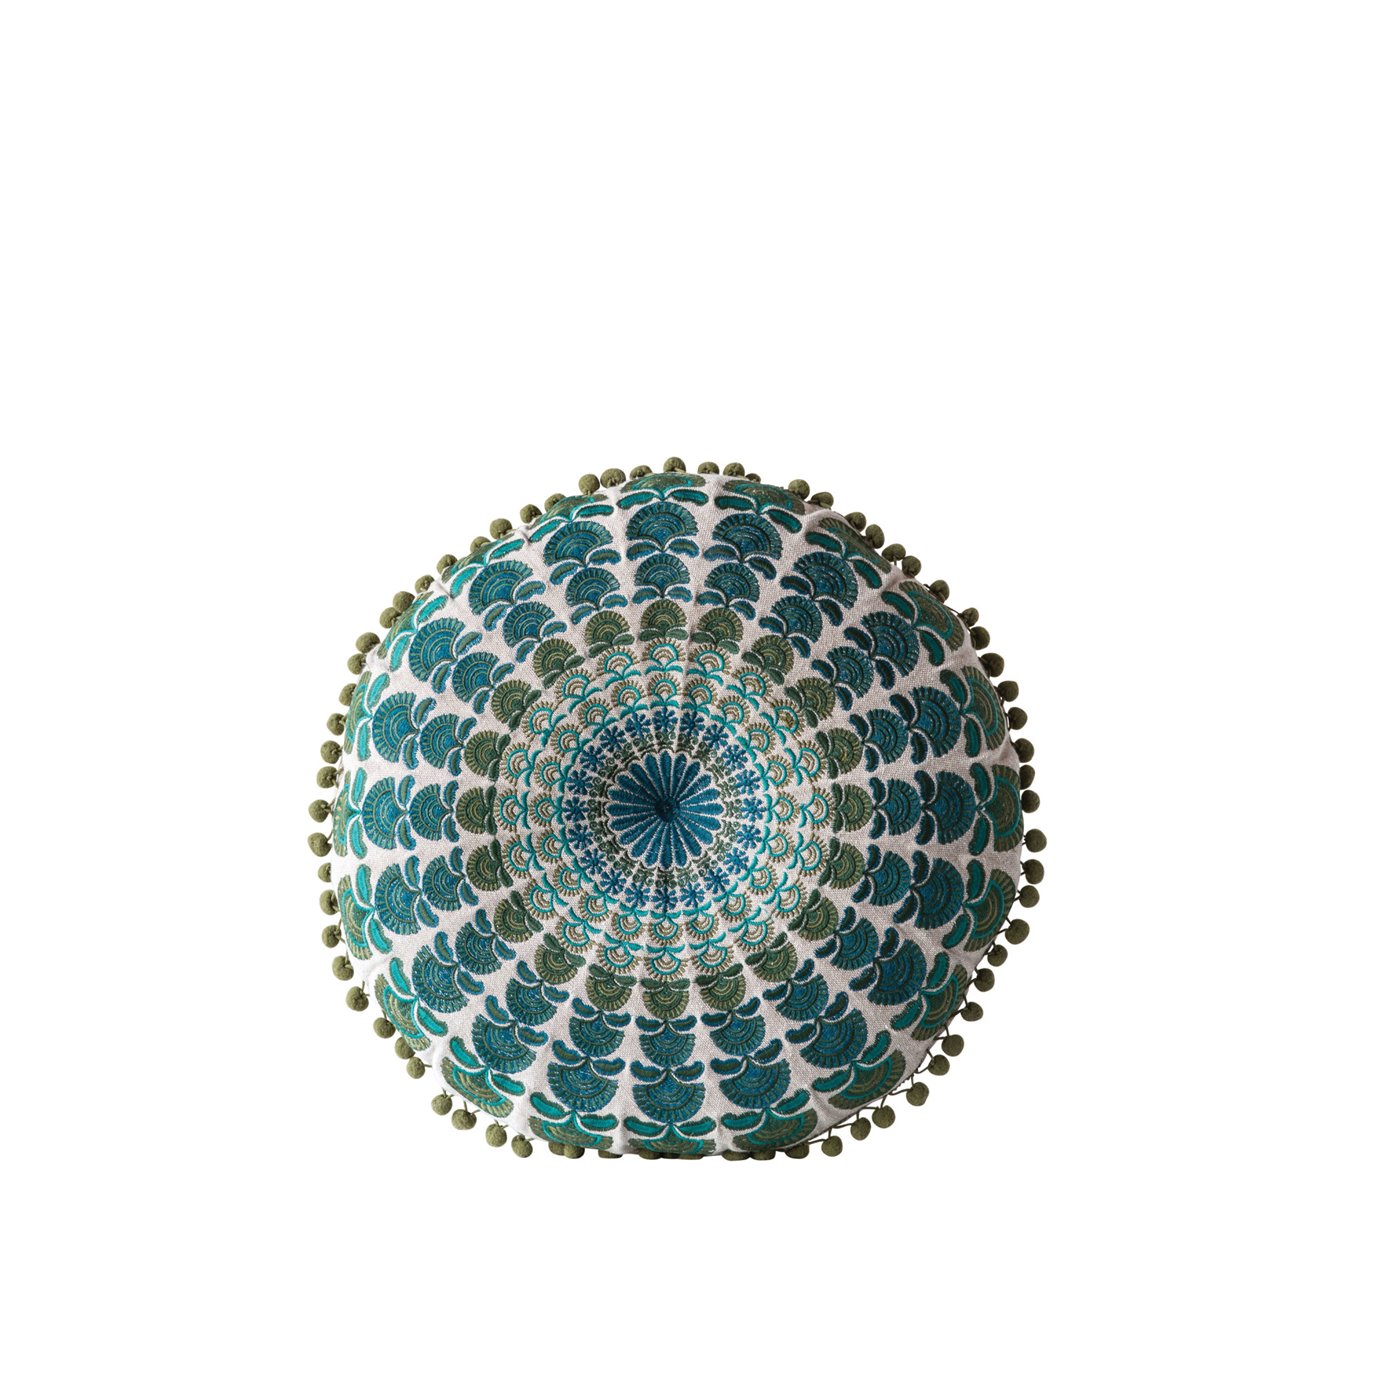 Blue & Green Round Cotton Chambray Pillow with Pom Poms